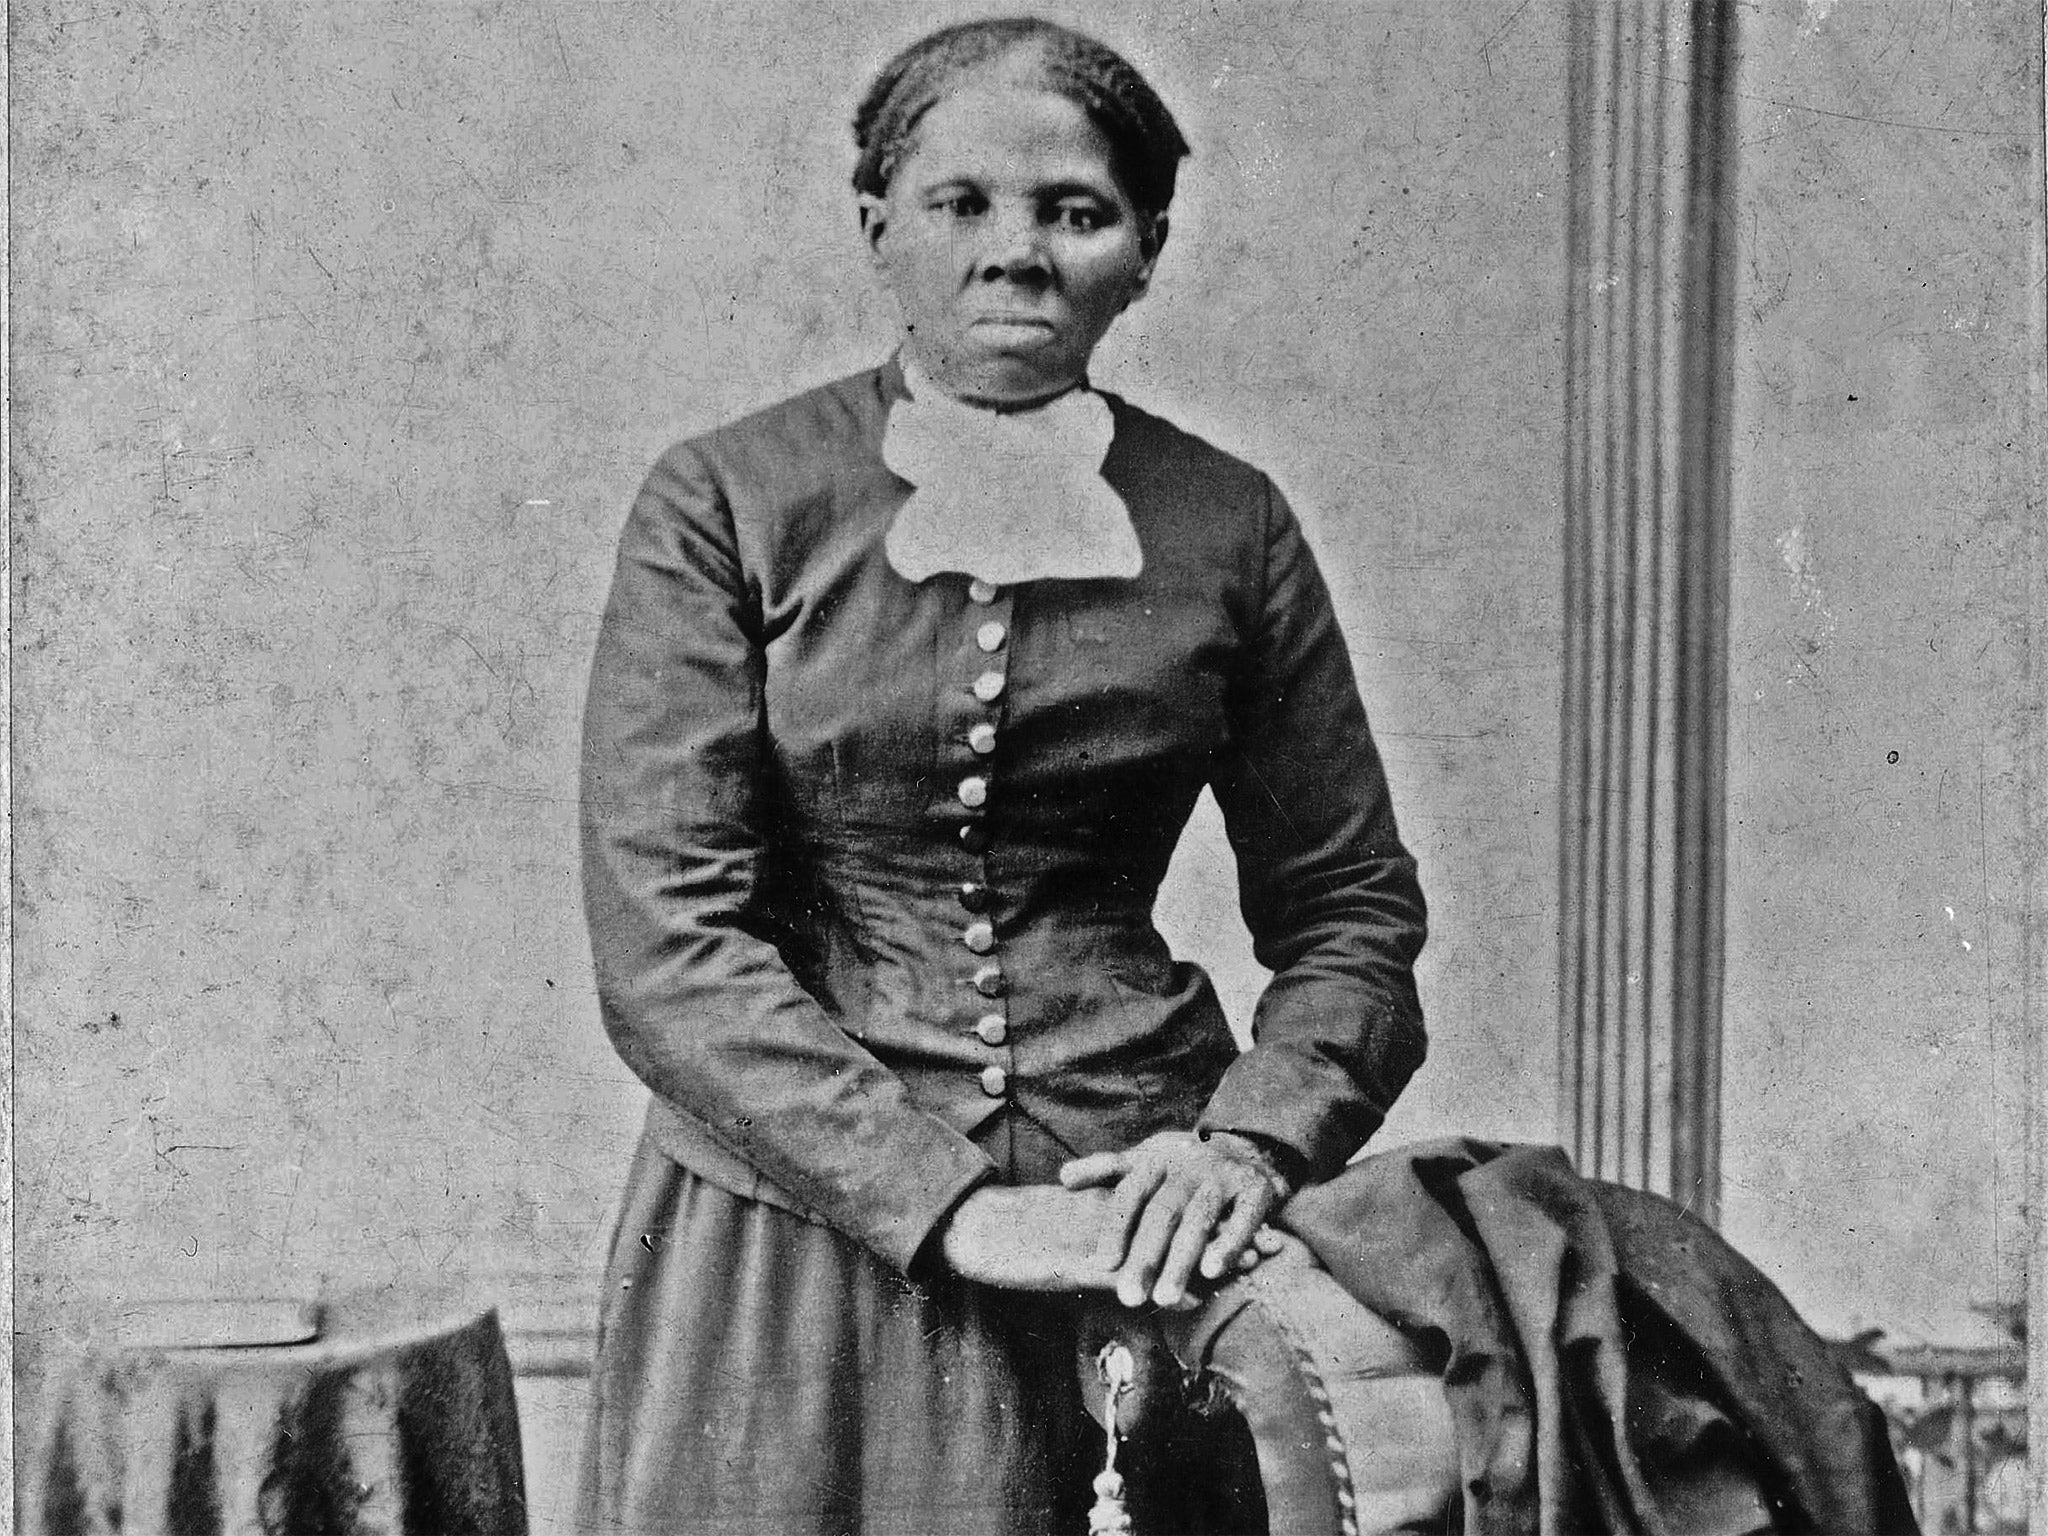 Harriet Tubman in a photograph dating from 1860-75. Her image proved the most popular in a public vote